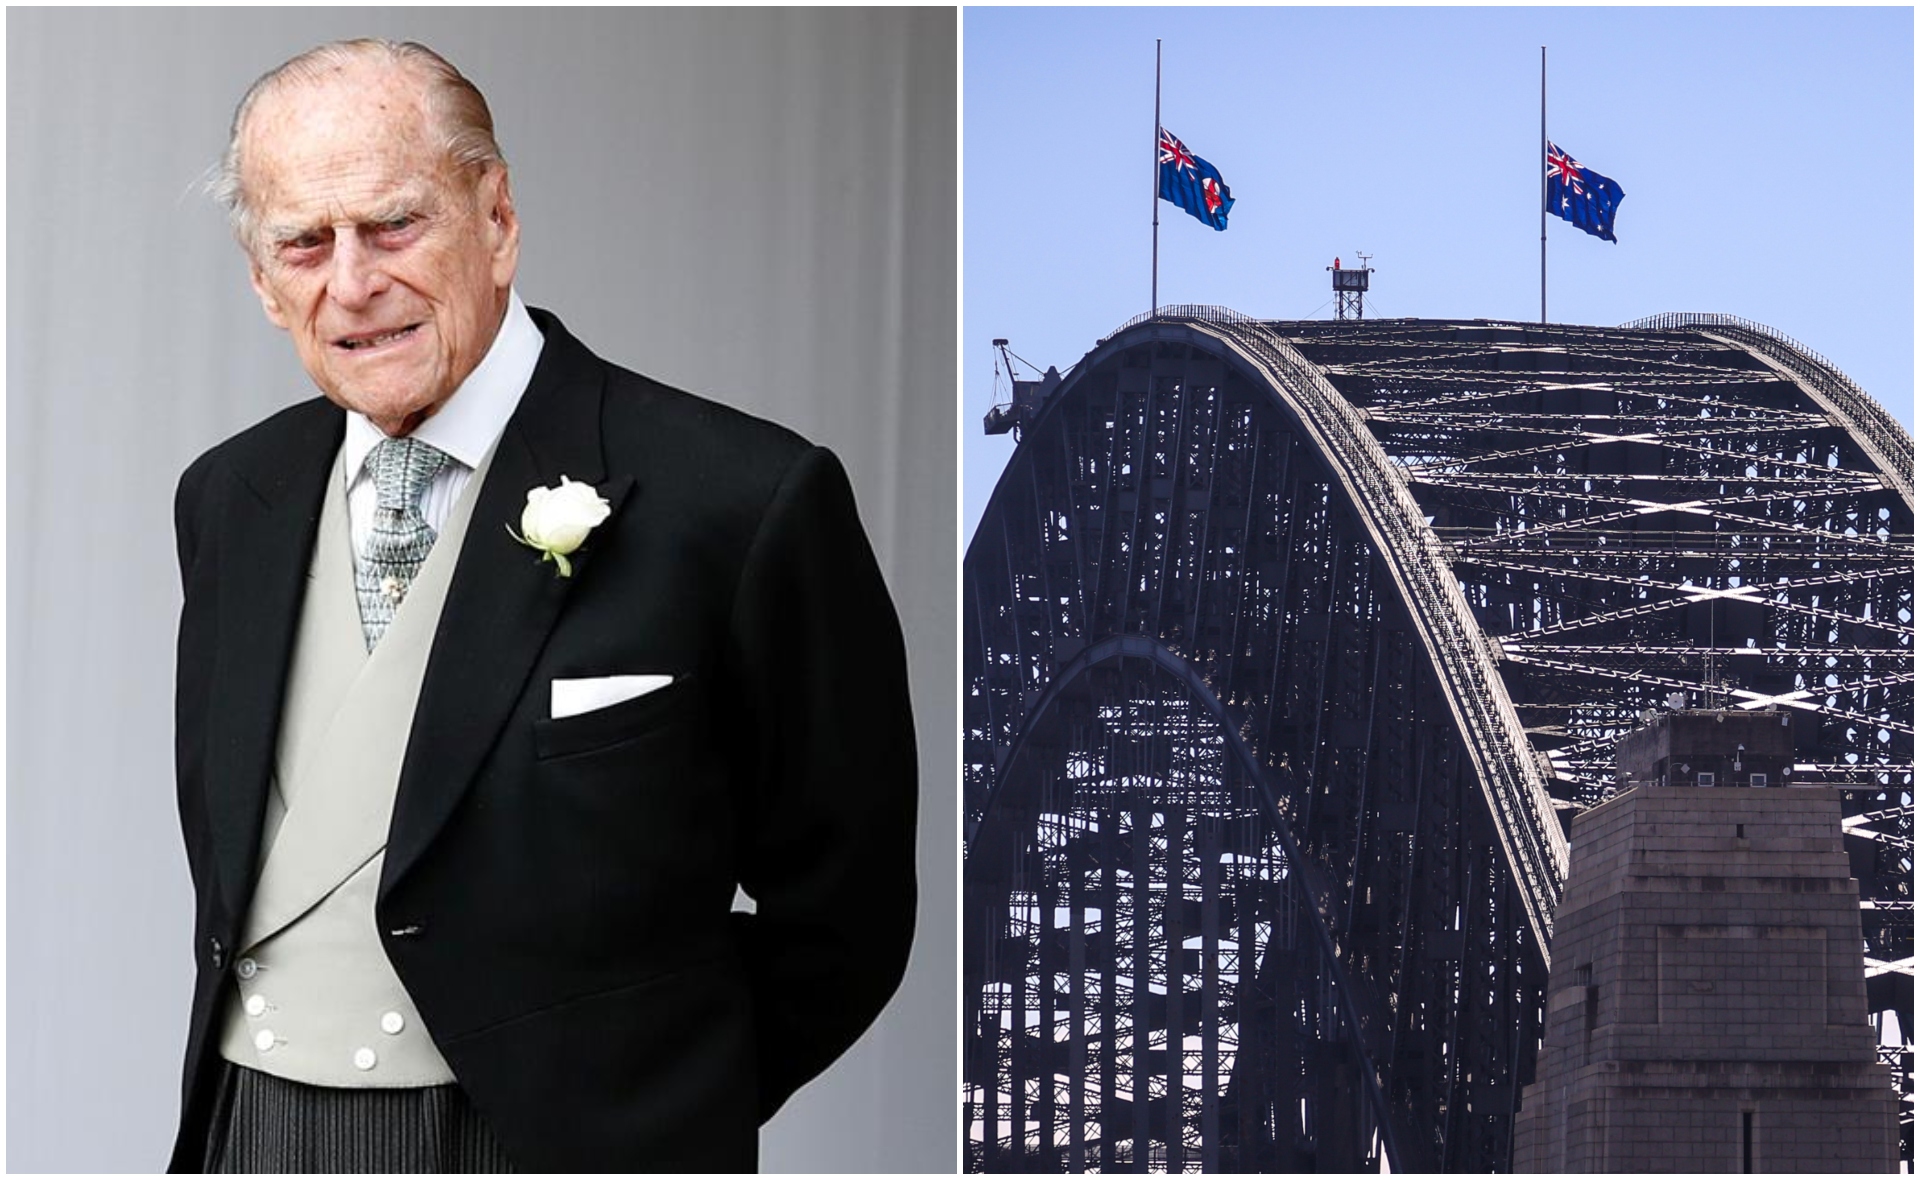 A gun-salute and an online book of condolence: Australia reacts to the death of Prince Philip